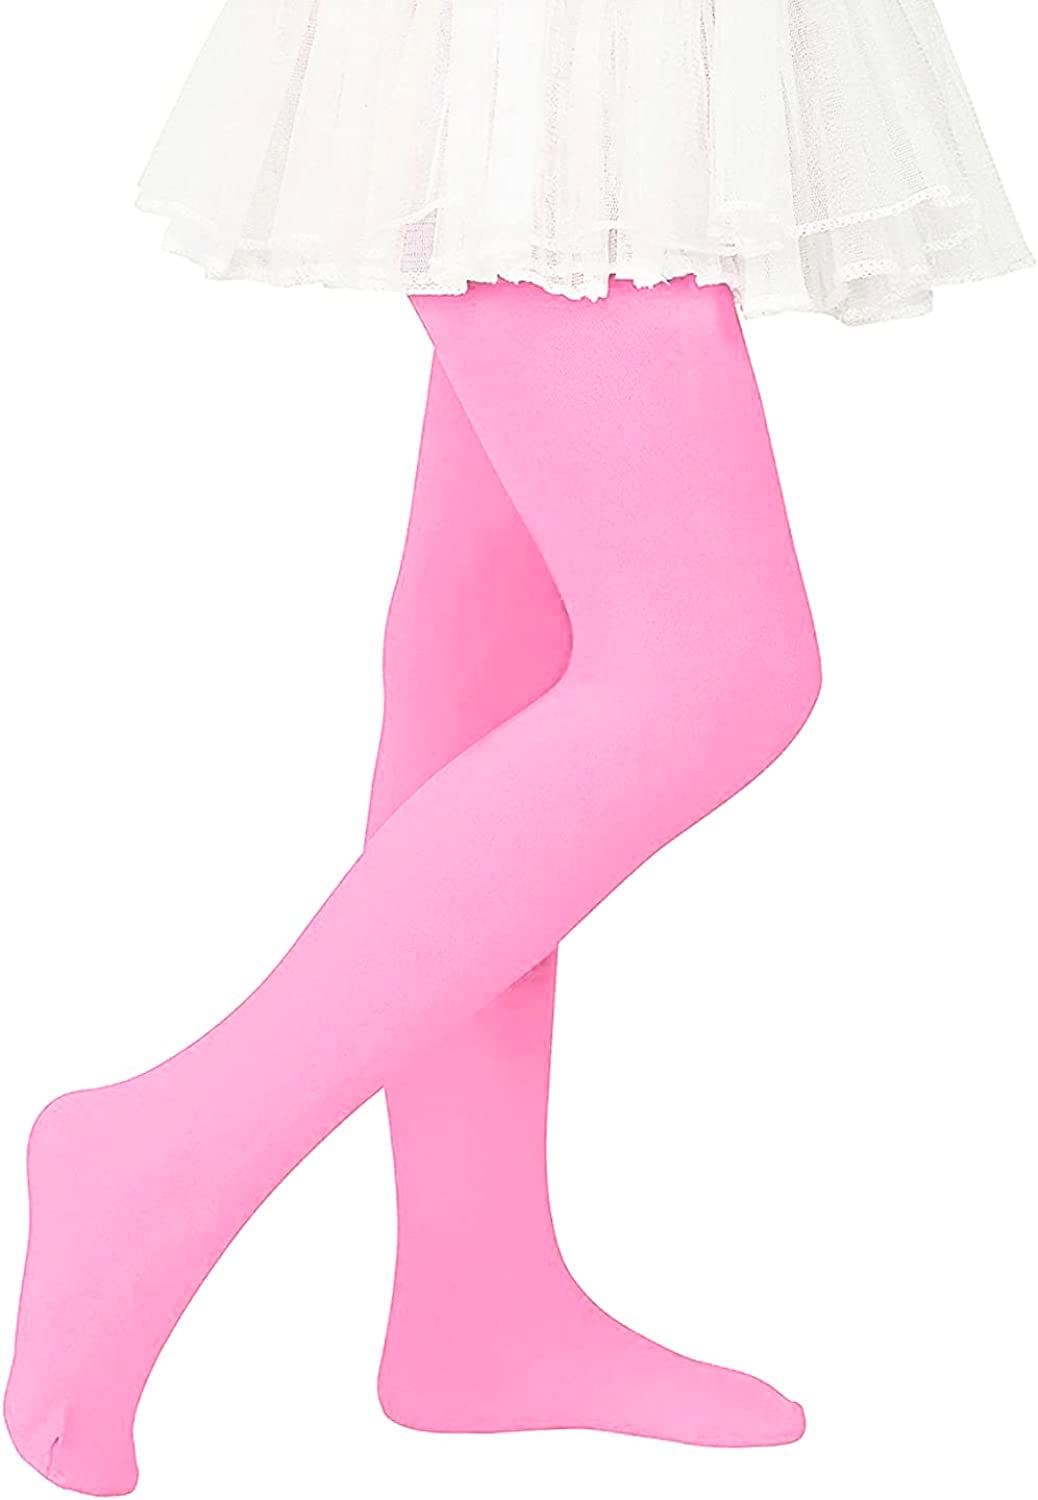  DIPUG Ballet Tights for Girls Dance Tights Toddler Thick Soft  Footed Kids Pink Stockings Size 5t 6 7 8, 1 Pack: Clothing, Shoes & Jewelry